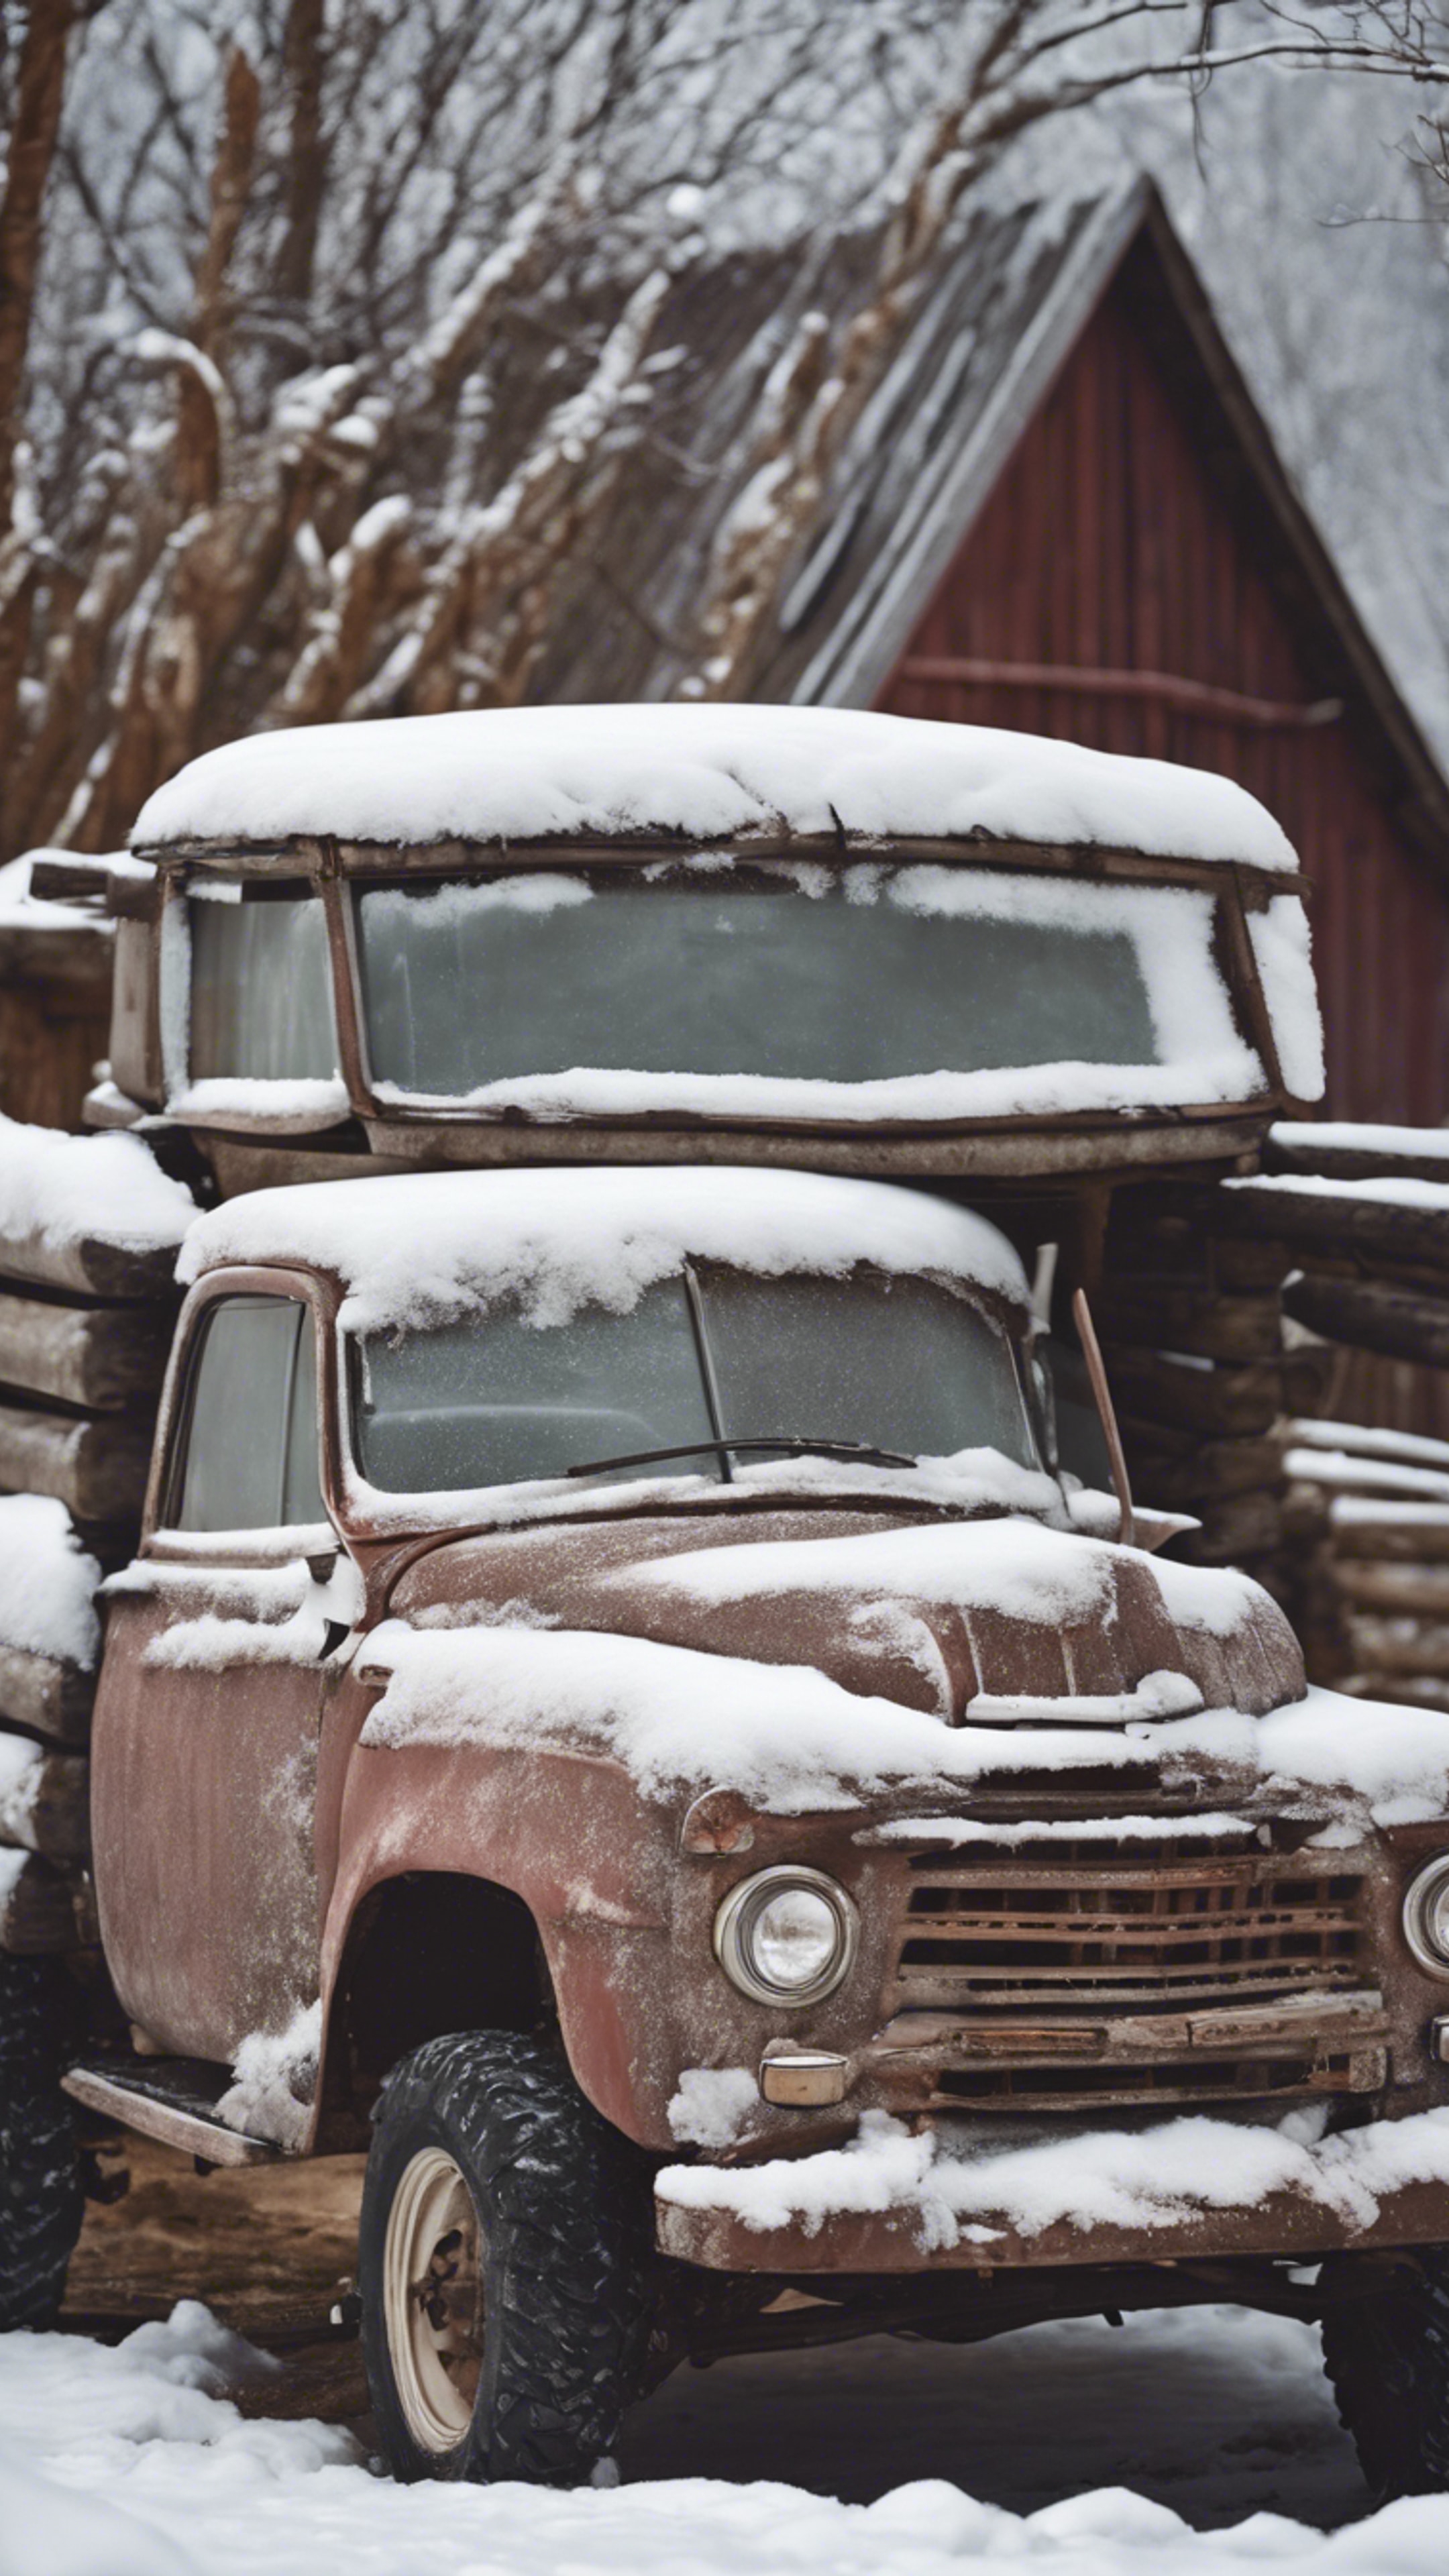 A beat-up, vintage pickup truck covered in a layer of fluffy snow, parked at an old wooden barn. Wallpaper[258c26ac4bce4dbd87a1]